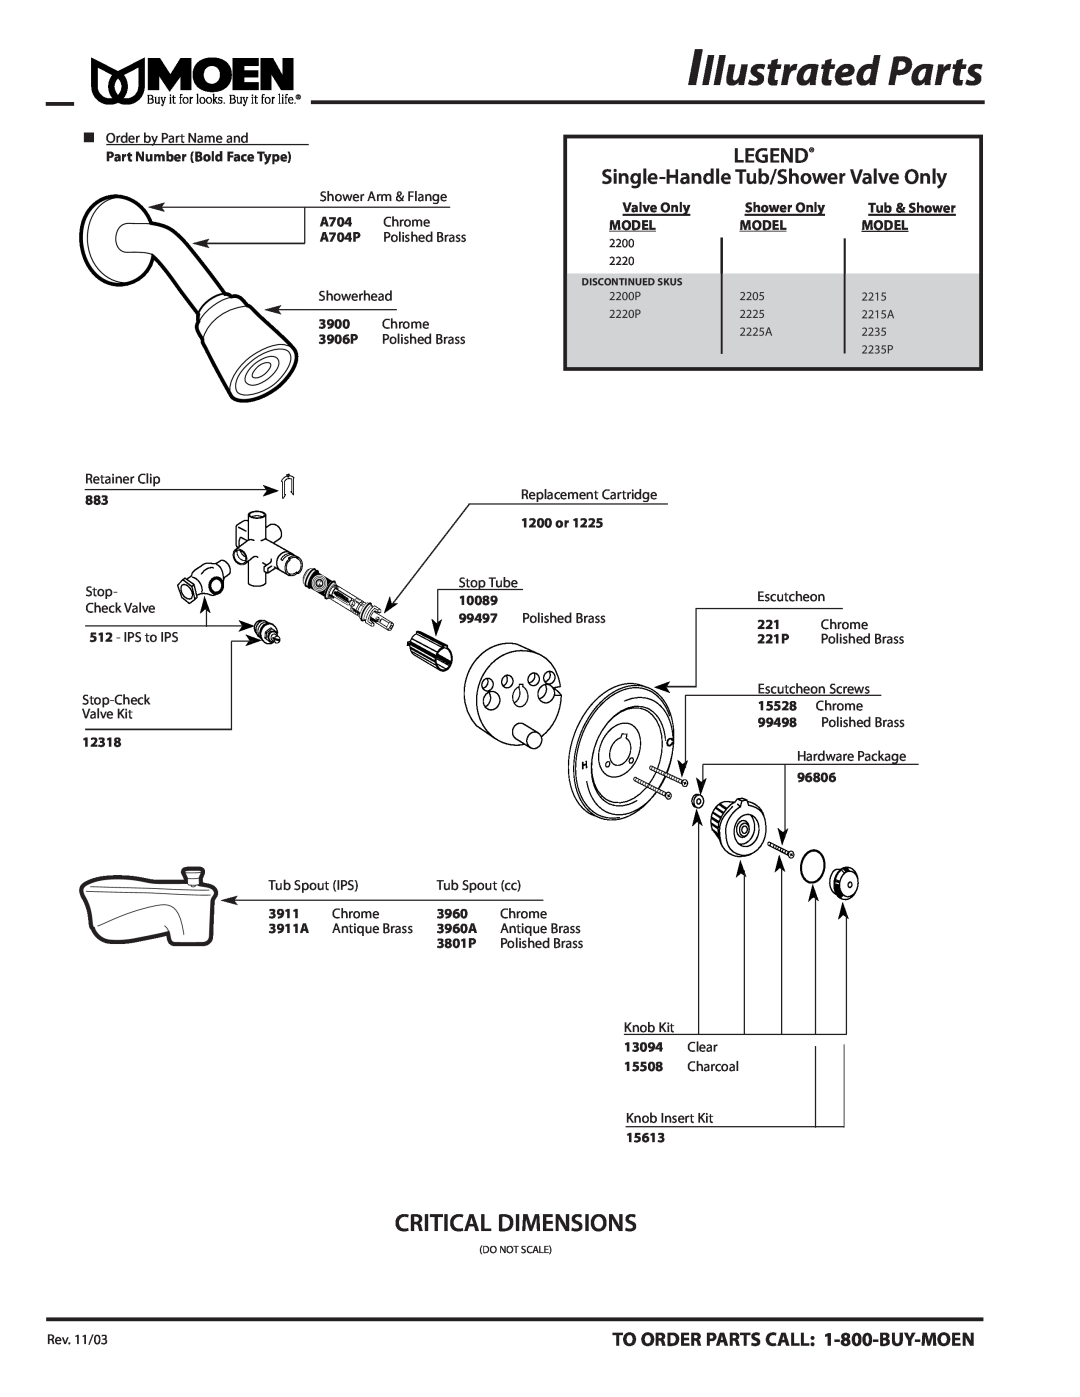 Moen 2225A, 2235P, 2215A, 2200P, 2205 dimensions Illustrated Parts, Critical Dimensions, Single-Handle Tub/Shower Valve Only 